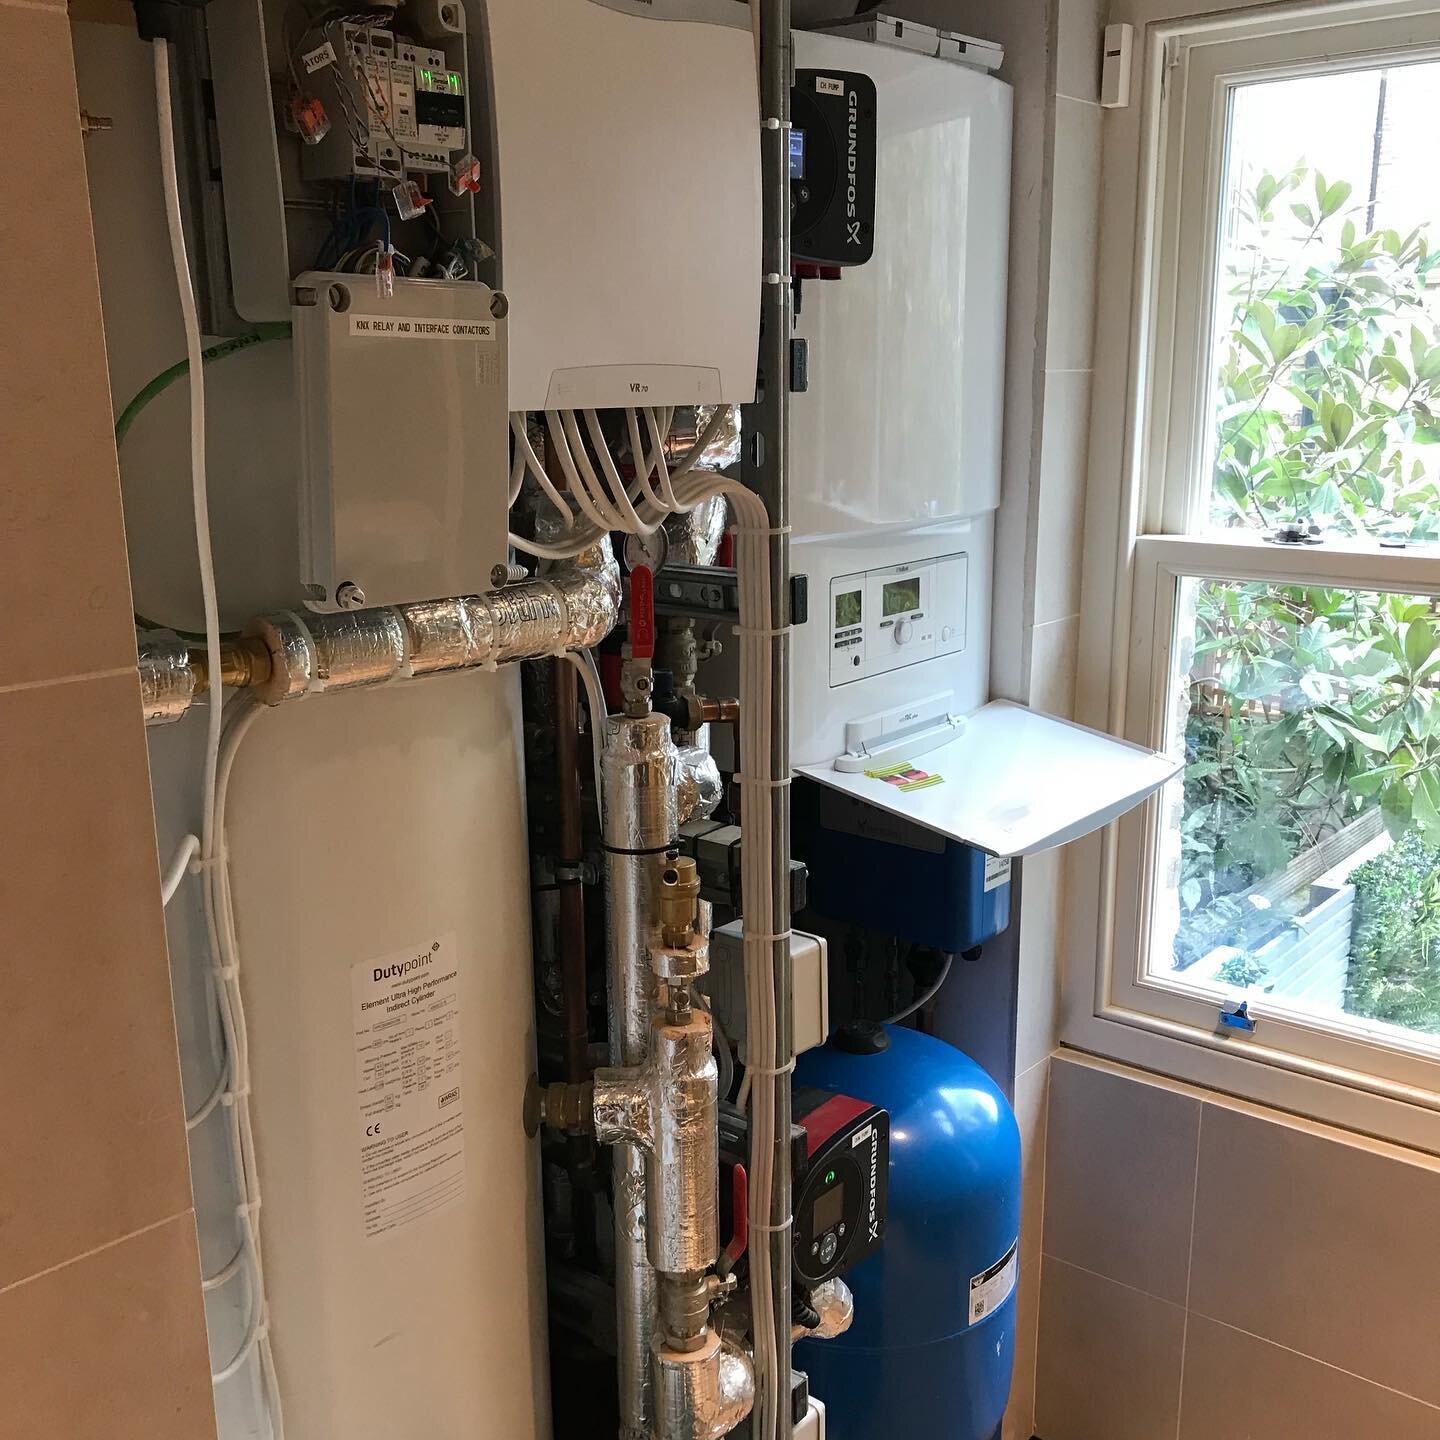 Arguably the works smallest plant room for a recent townhouse project in London. Credit to the plumber for making it fit.!
#BPH #mane #maneelectrical #engineering #electrician #sparkylife #vaillant #grundfospumps #knx